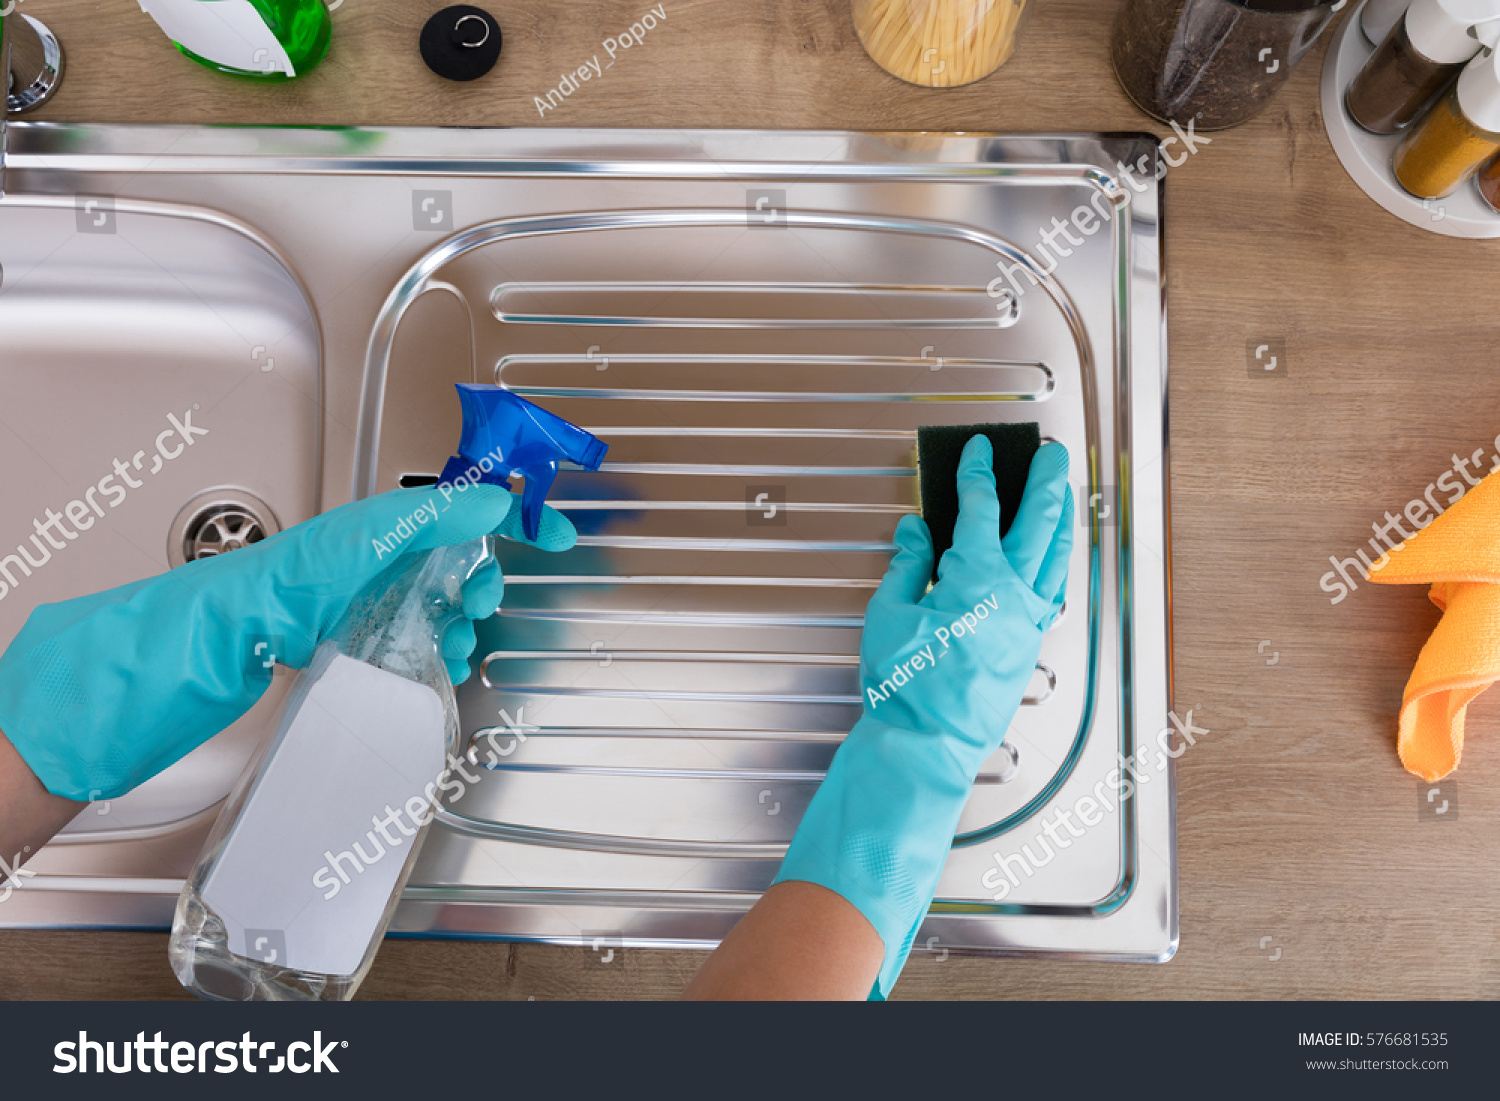 High Angle View Of Person Hands Cleaning Kitchen Sink With Spray Bottle And Sponge #576681535